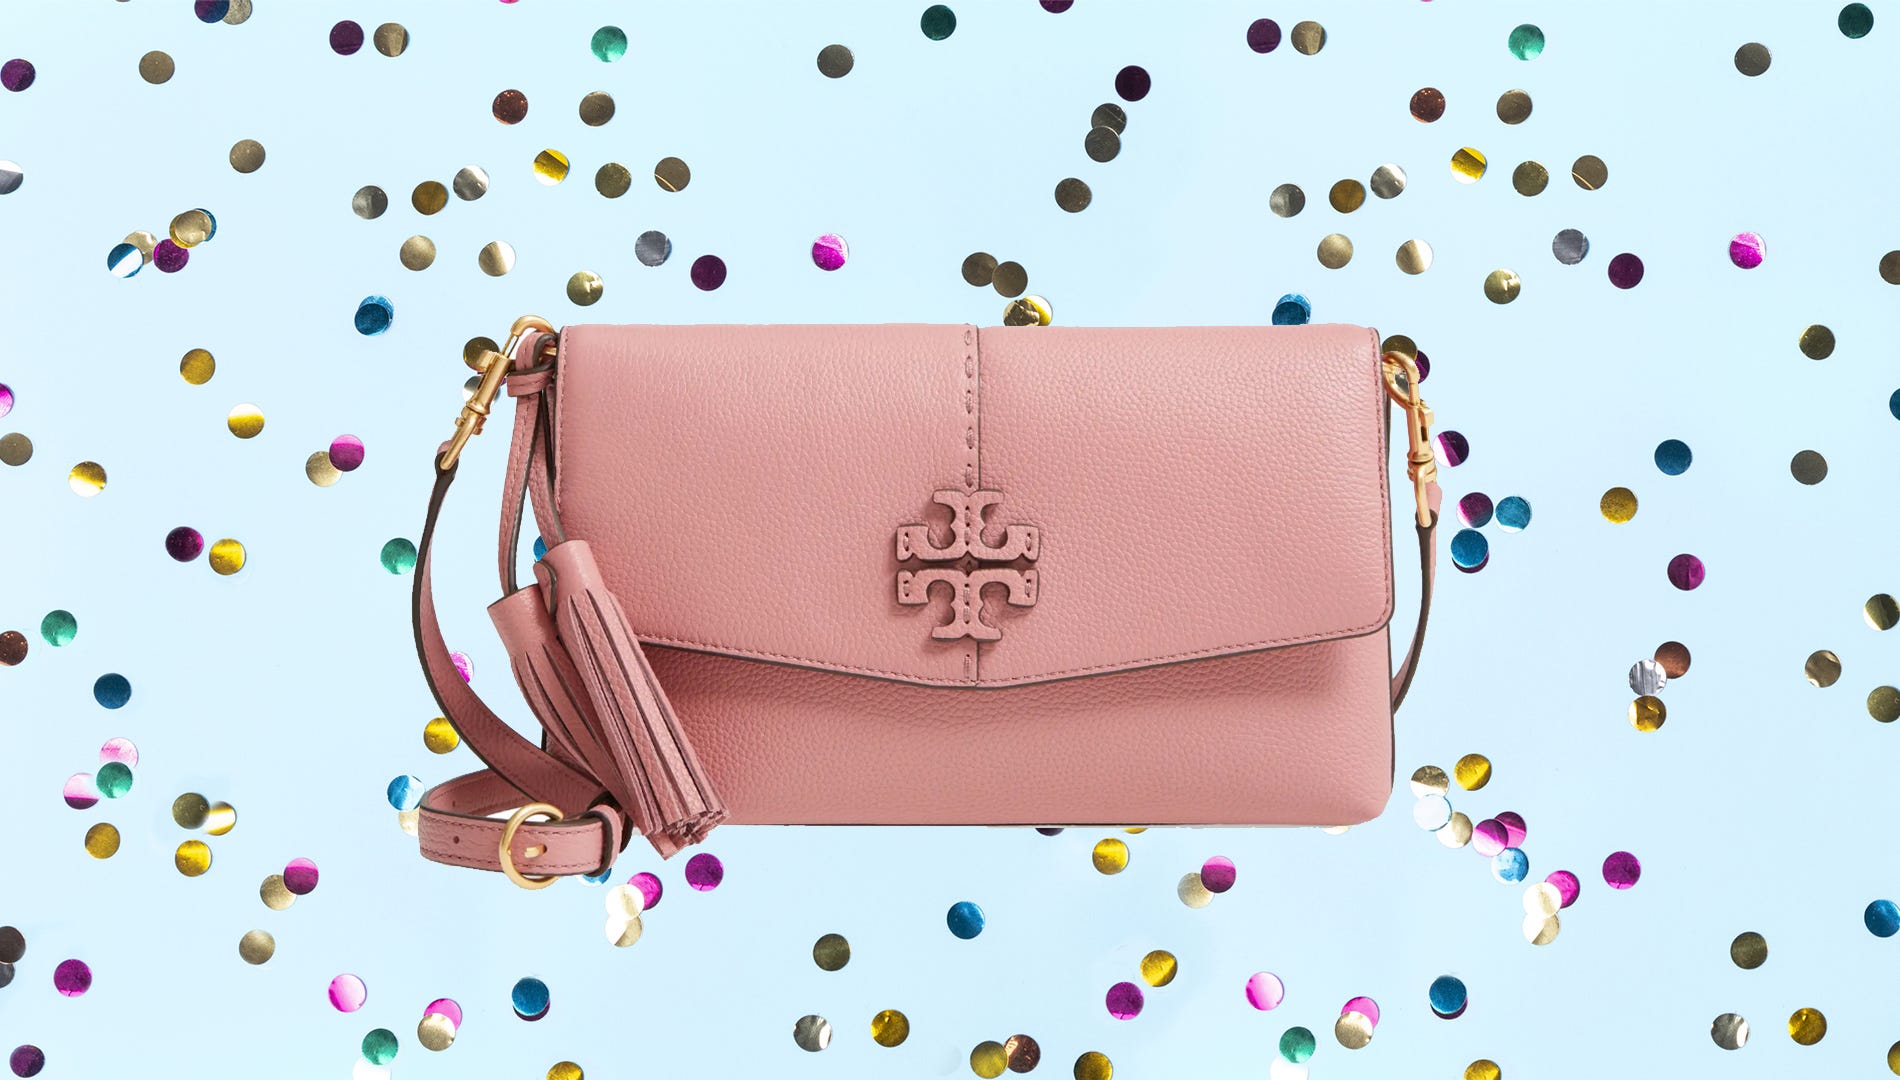 Tory Burch Handbags at Nordstrom: Discover Over 96 Stunning Images ...